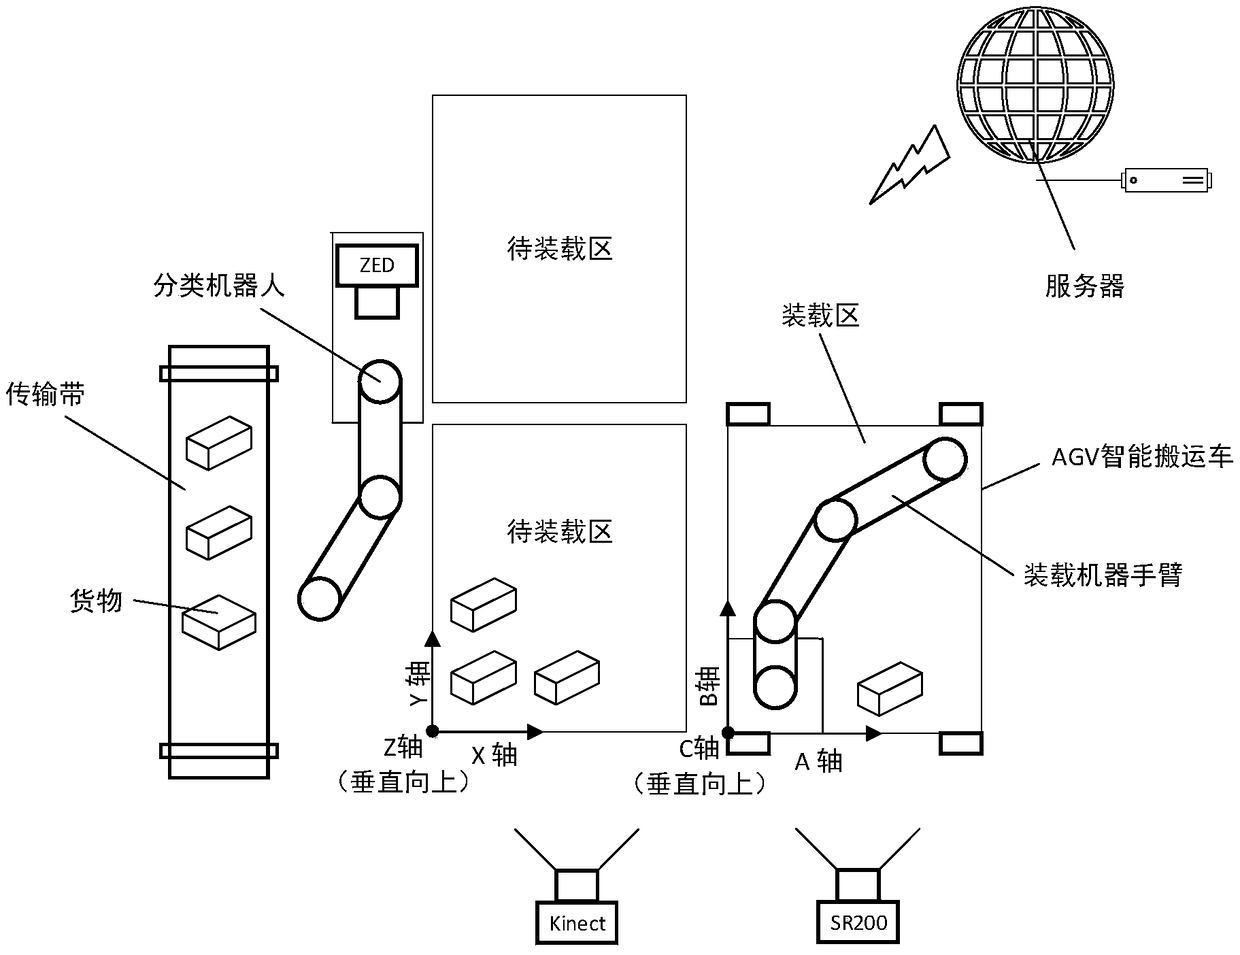 Loading method and device of intelligent logistics environment robot